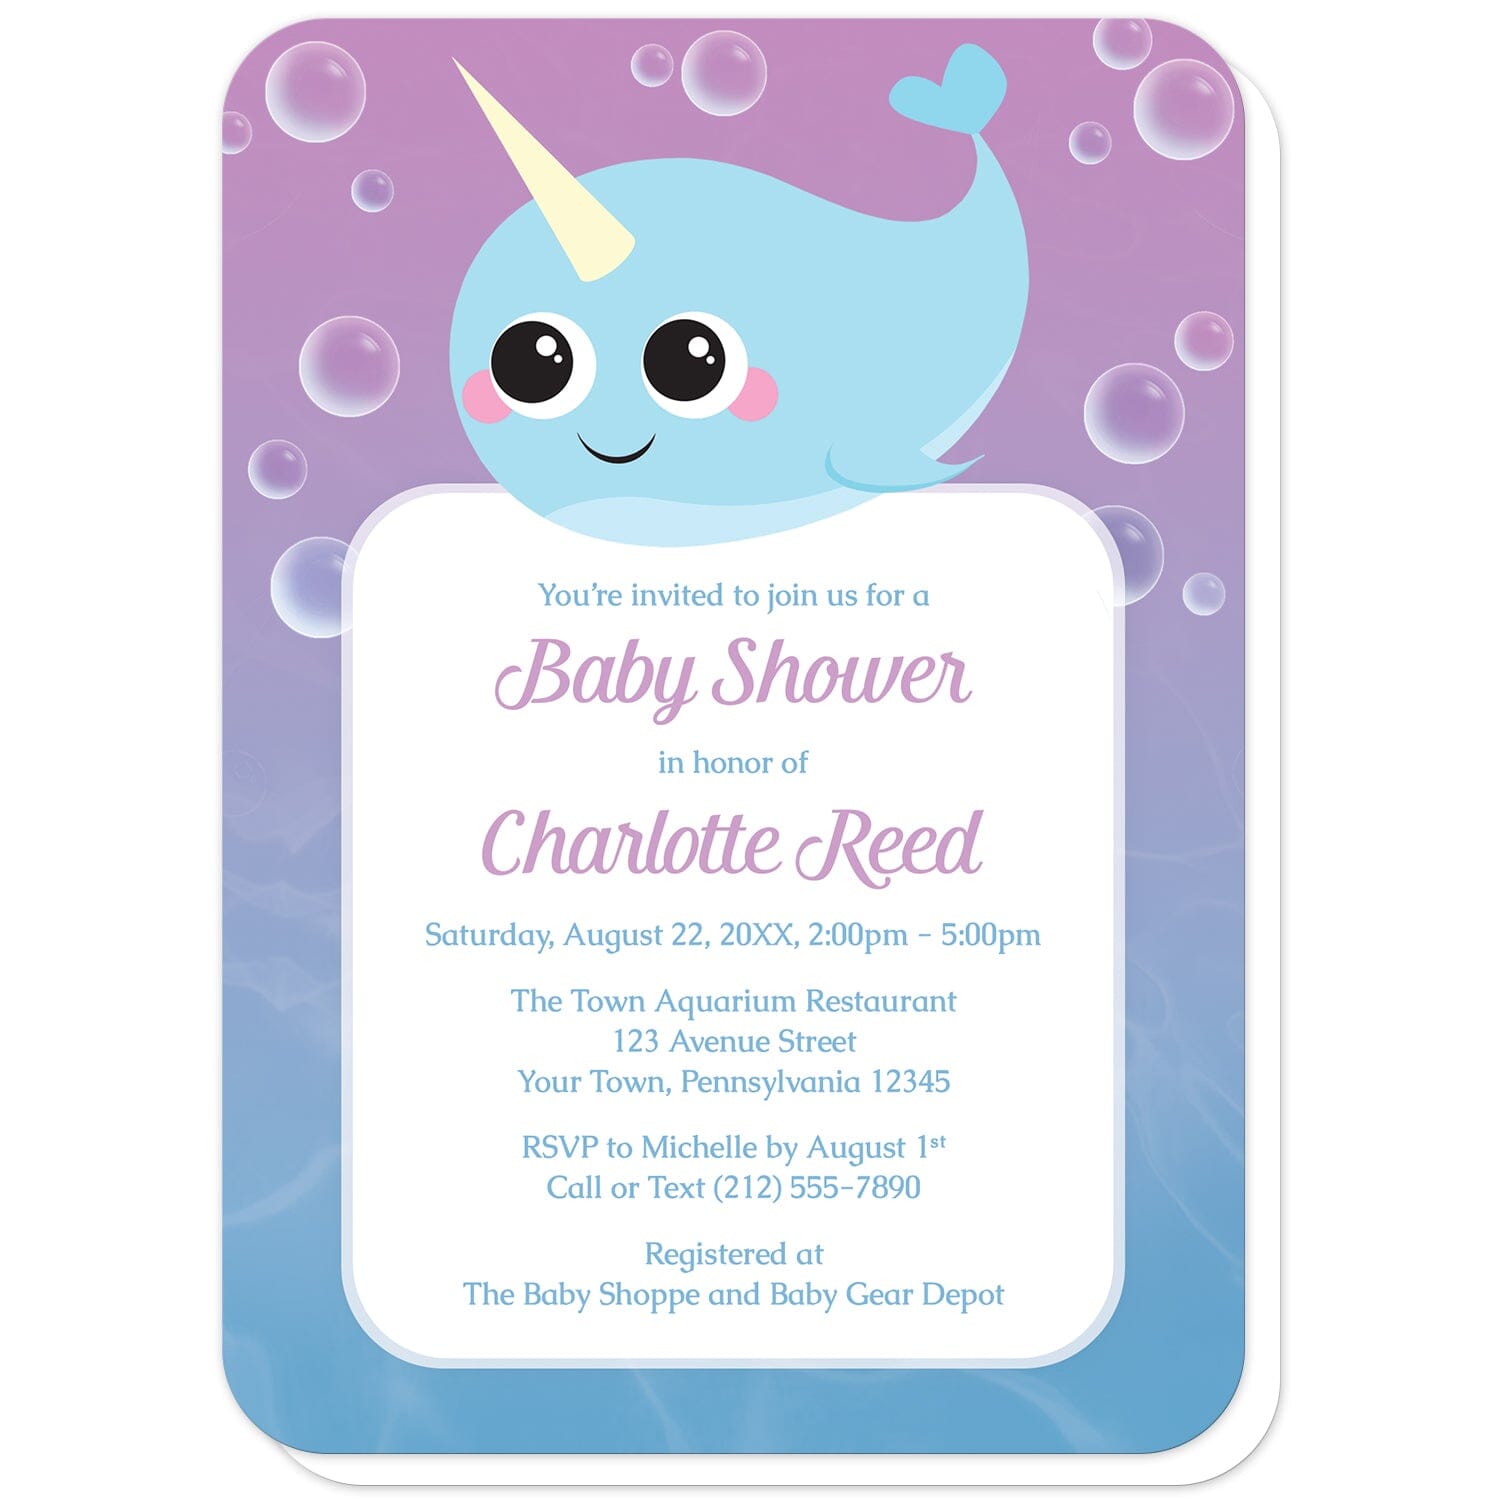 Cute Happy Narwhal Baby Shower Invitations (with rounded corners) at Artistically Invited. Cute happy narwhal baby shower invitations that are illustrated with a cute and happy blue narwhal surrounded by bubbles, over a purple to blue gradient ombre underwater background. Your personalized baby shower celebration details are custom printed in purple and blue over a white rectangular area over the gradient water background.